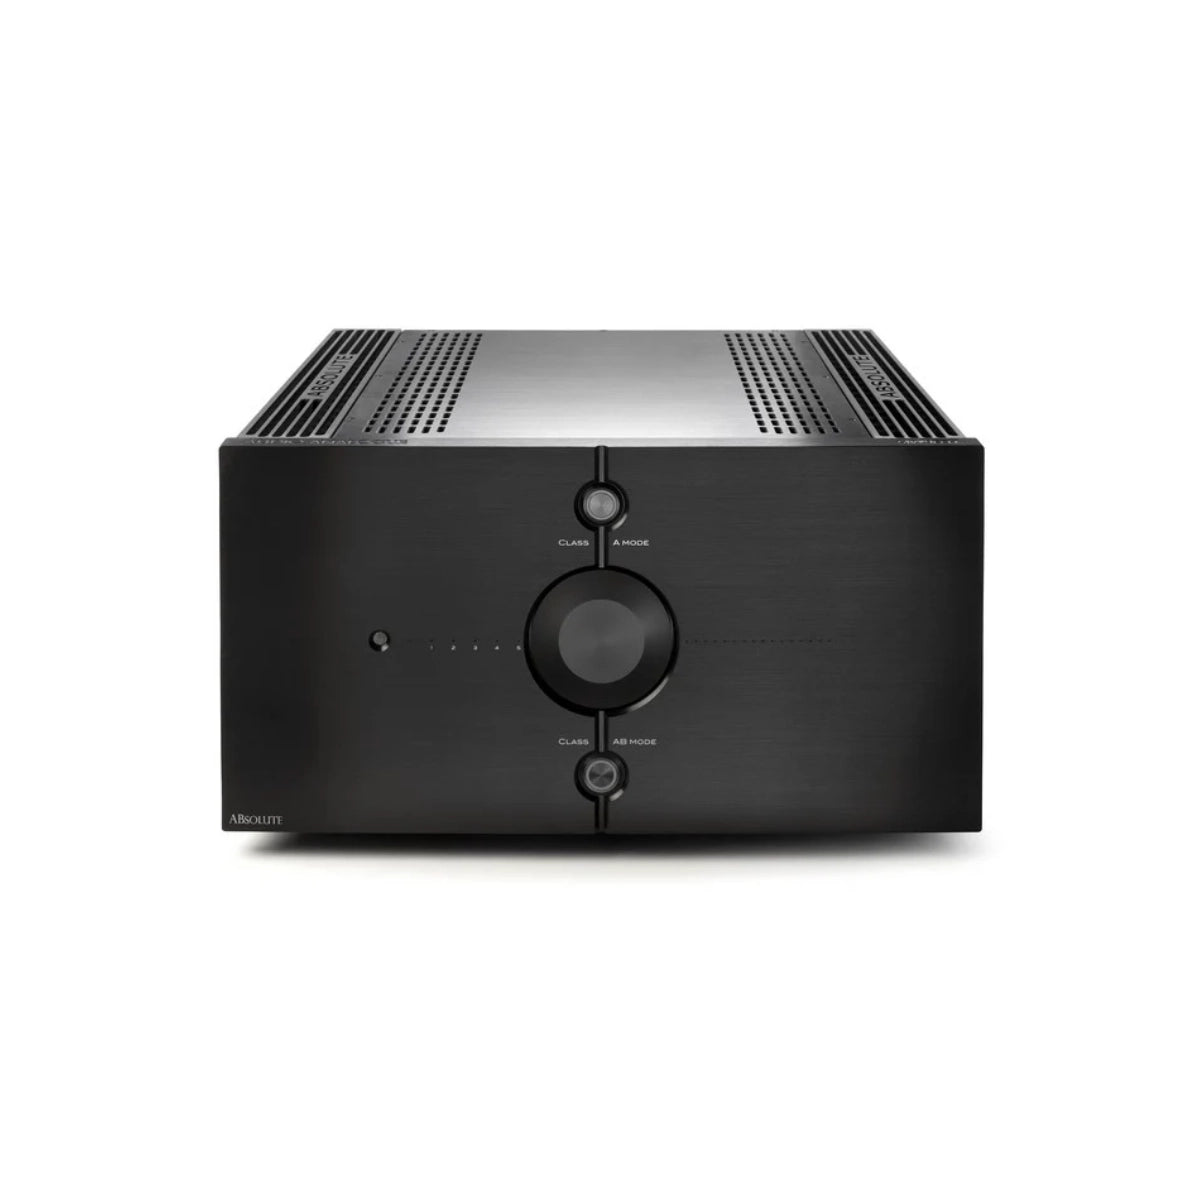 An image of Audio Analogue's Absolute 50w pure class-a integrated amplifier in black finish.